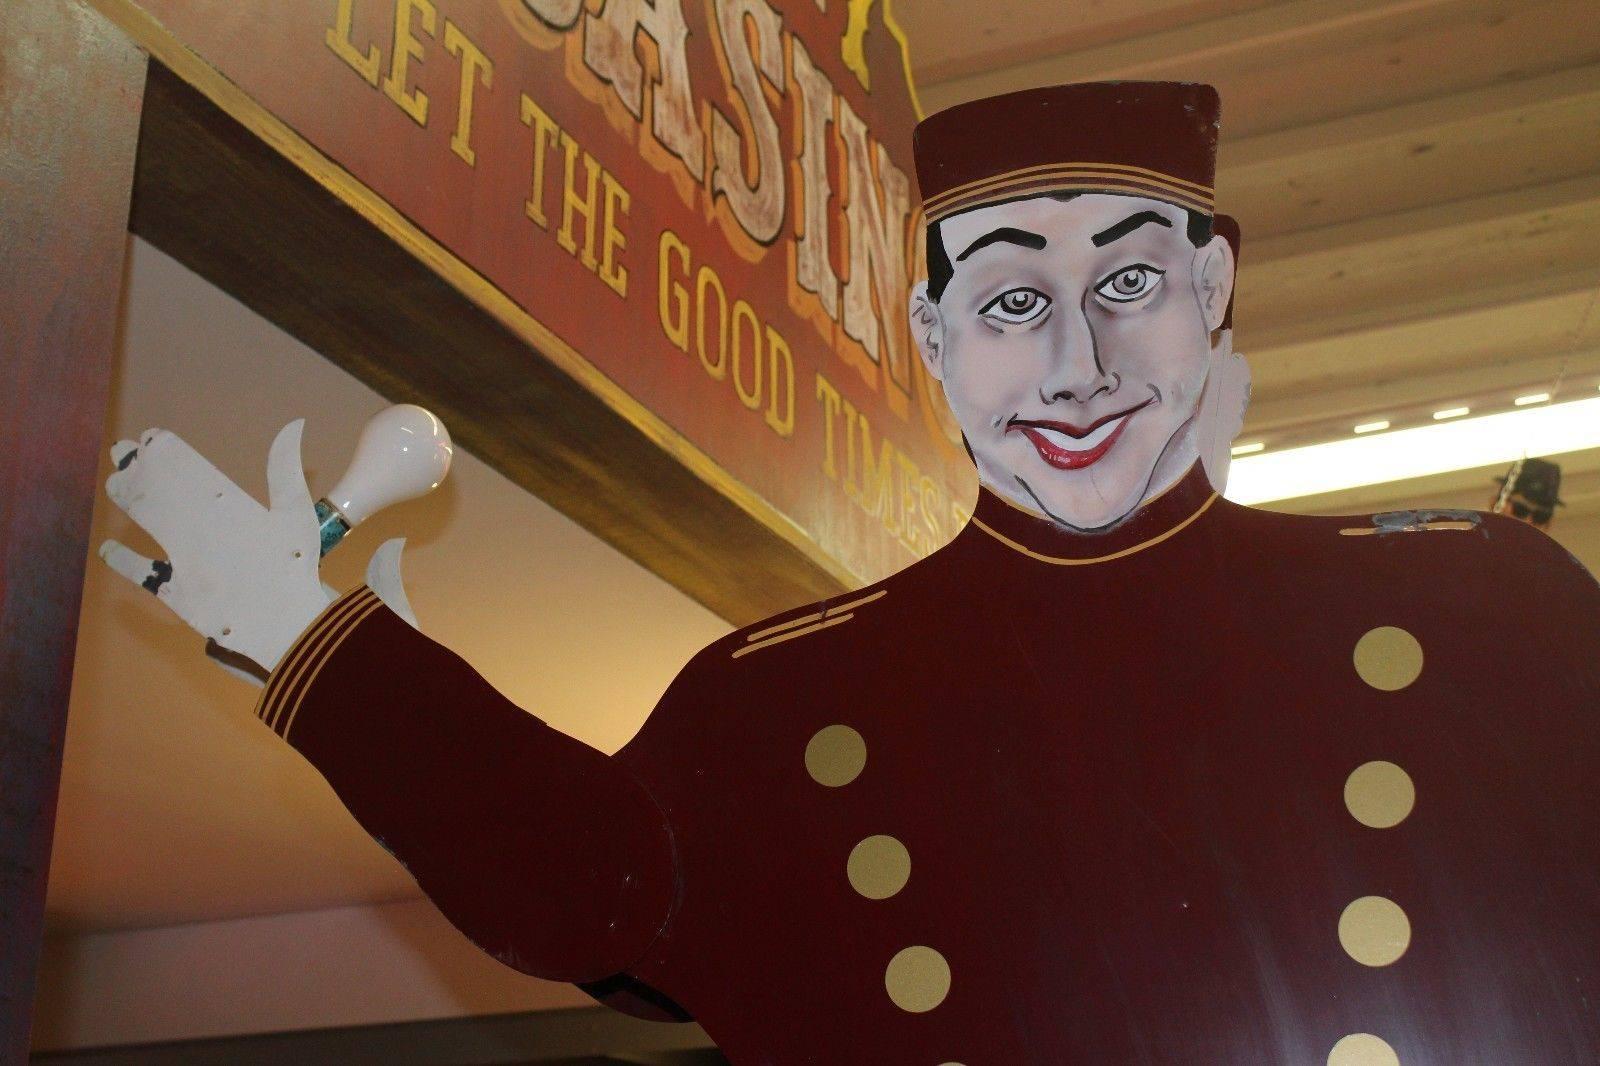 This is a Lighted Bellhop National Animated Sign Co. double-sided that is Manufactured by National Animated Co. These bellhop signs were developed in the late 1940s and patented in 1951 by the National Animated Sign Co. of Hot Springs, AR. These